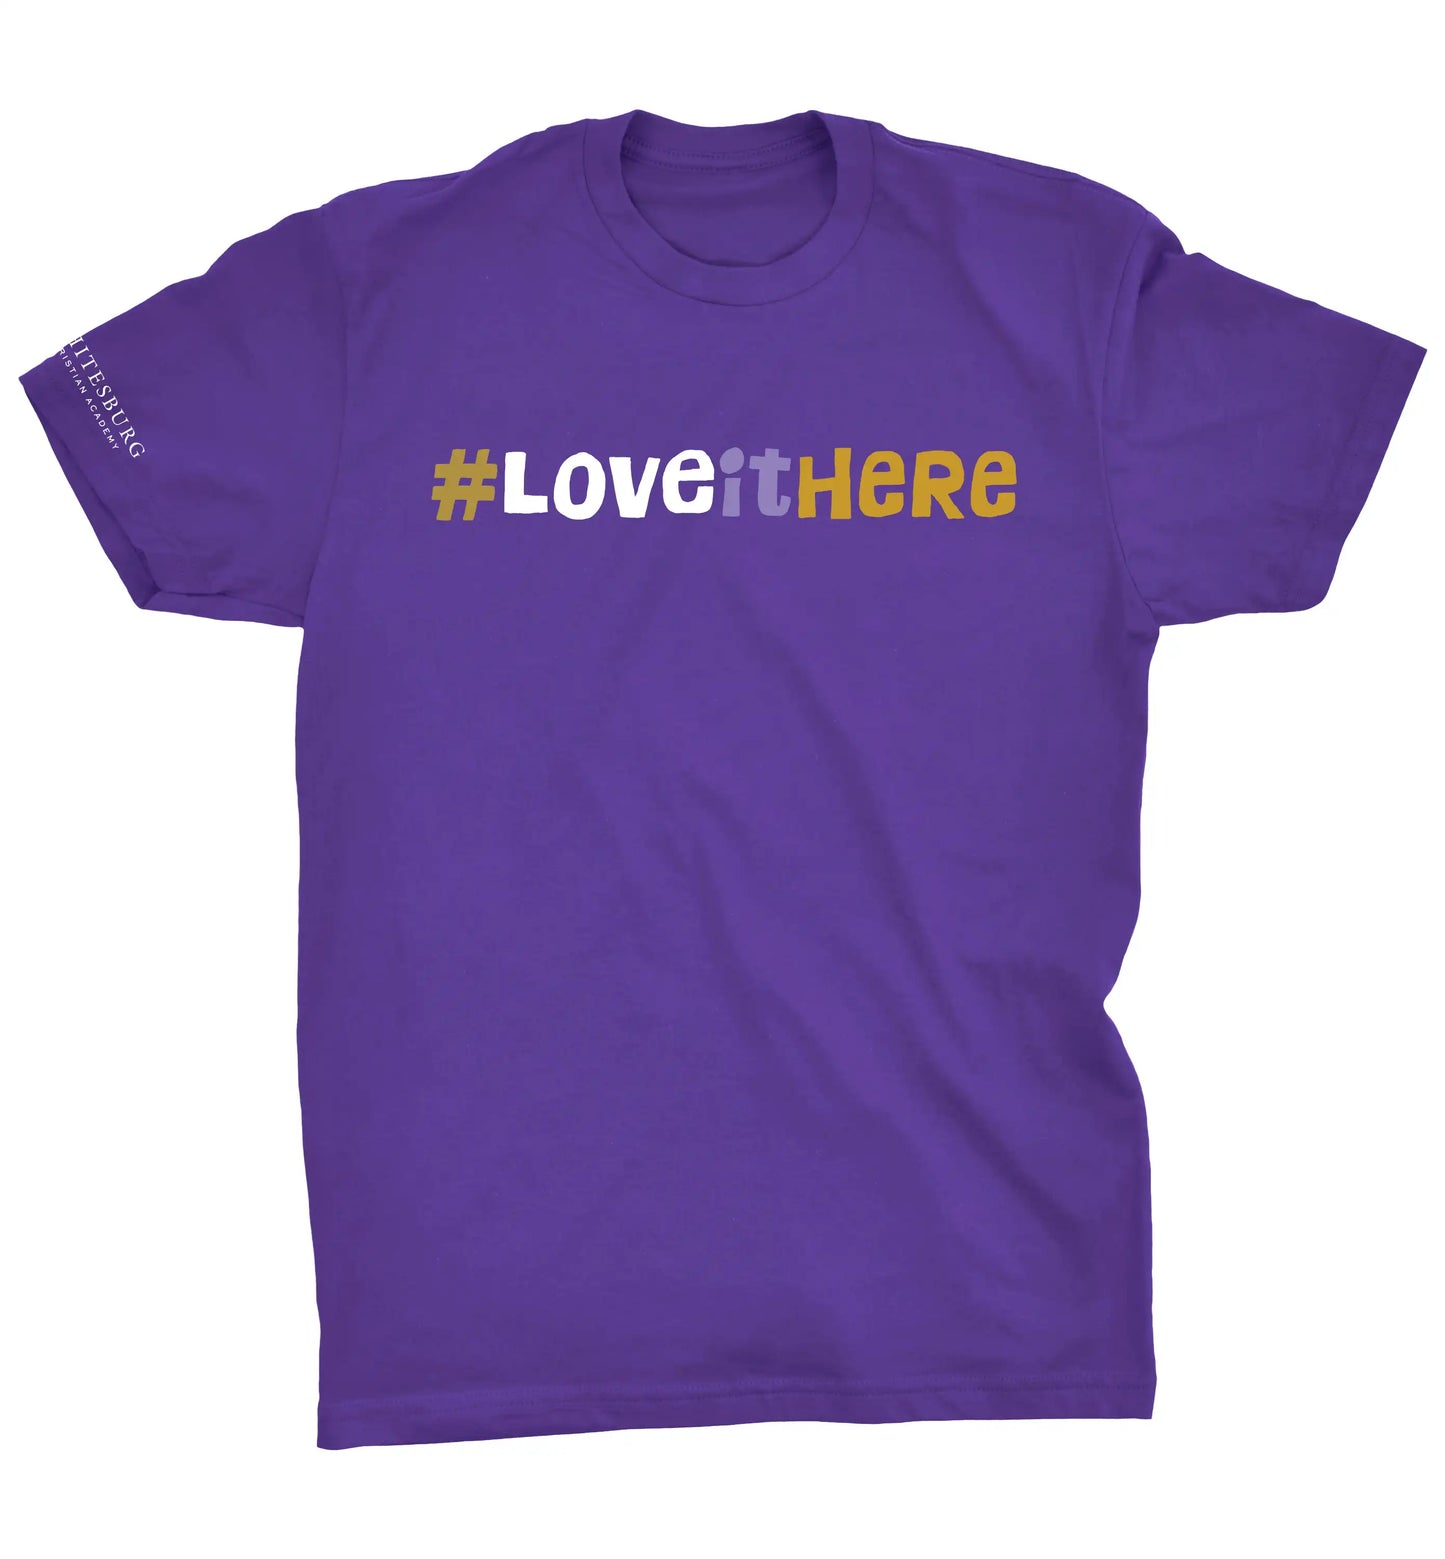 #LoveItHere Tshirt